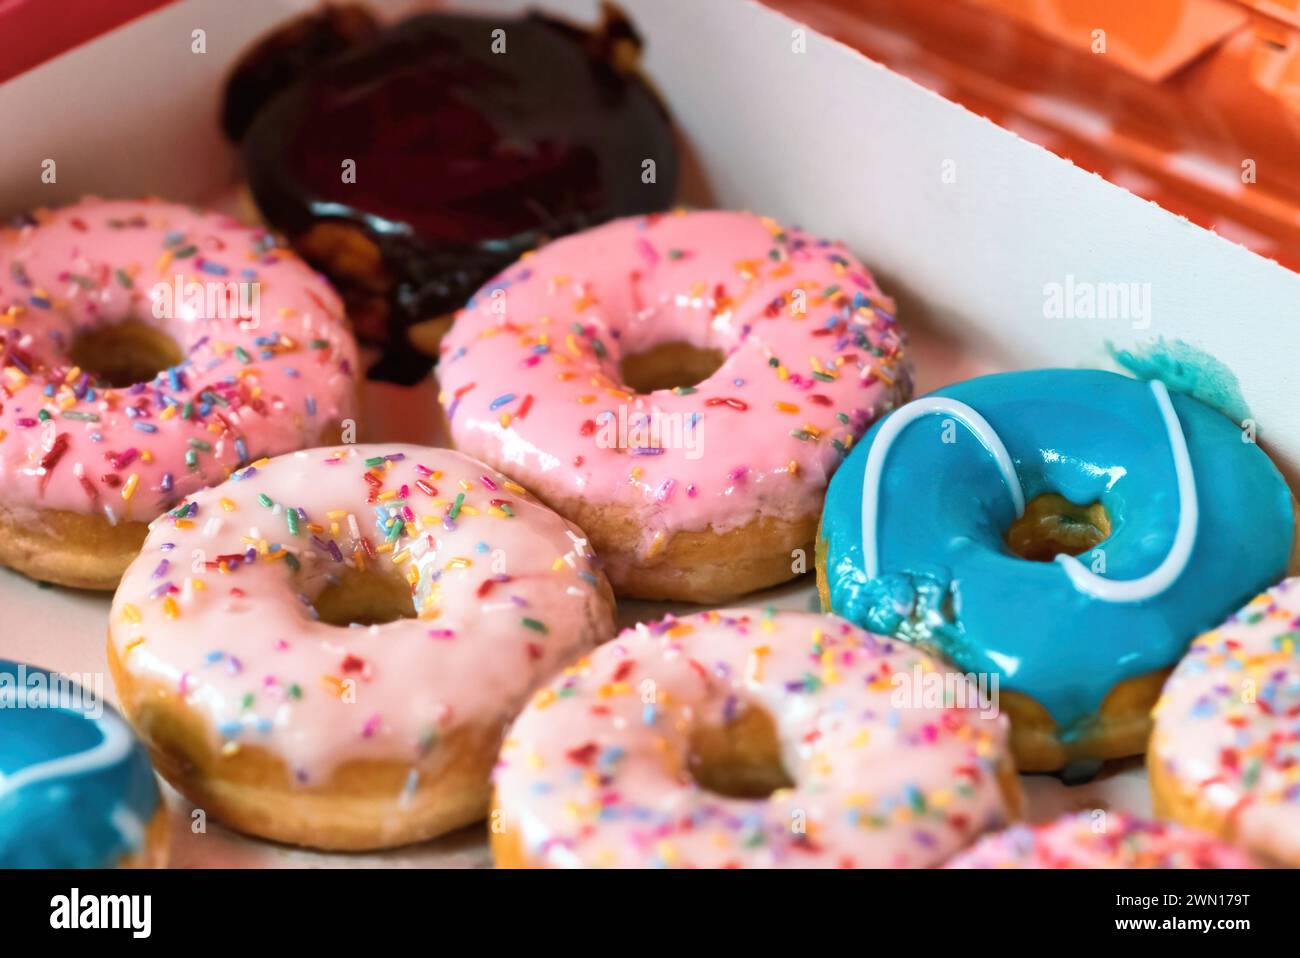 Close-up of a cardboard box full of colorful doughnuts topped with sprinkles and icing sugar coating Stock Photo